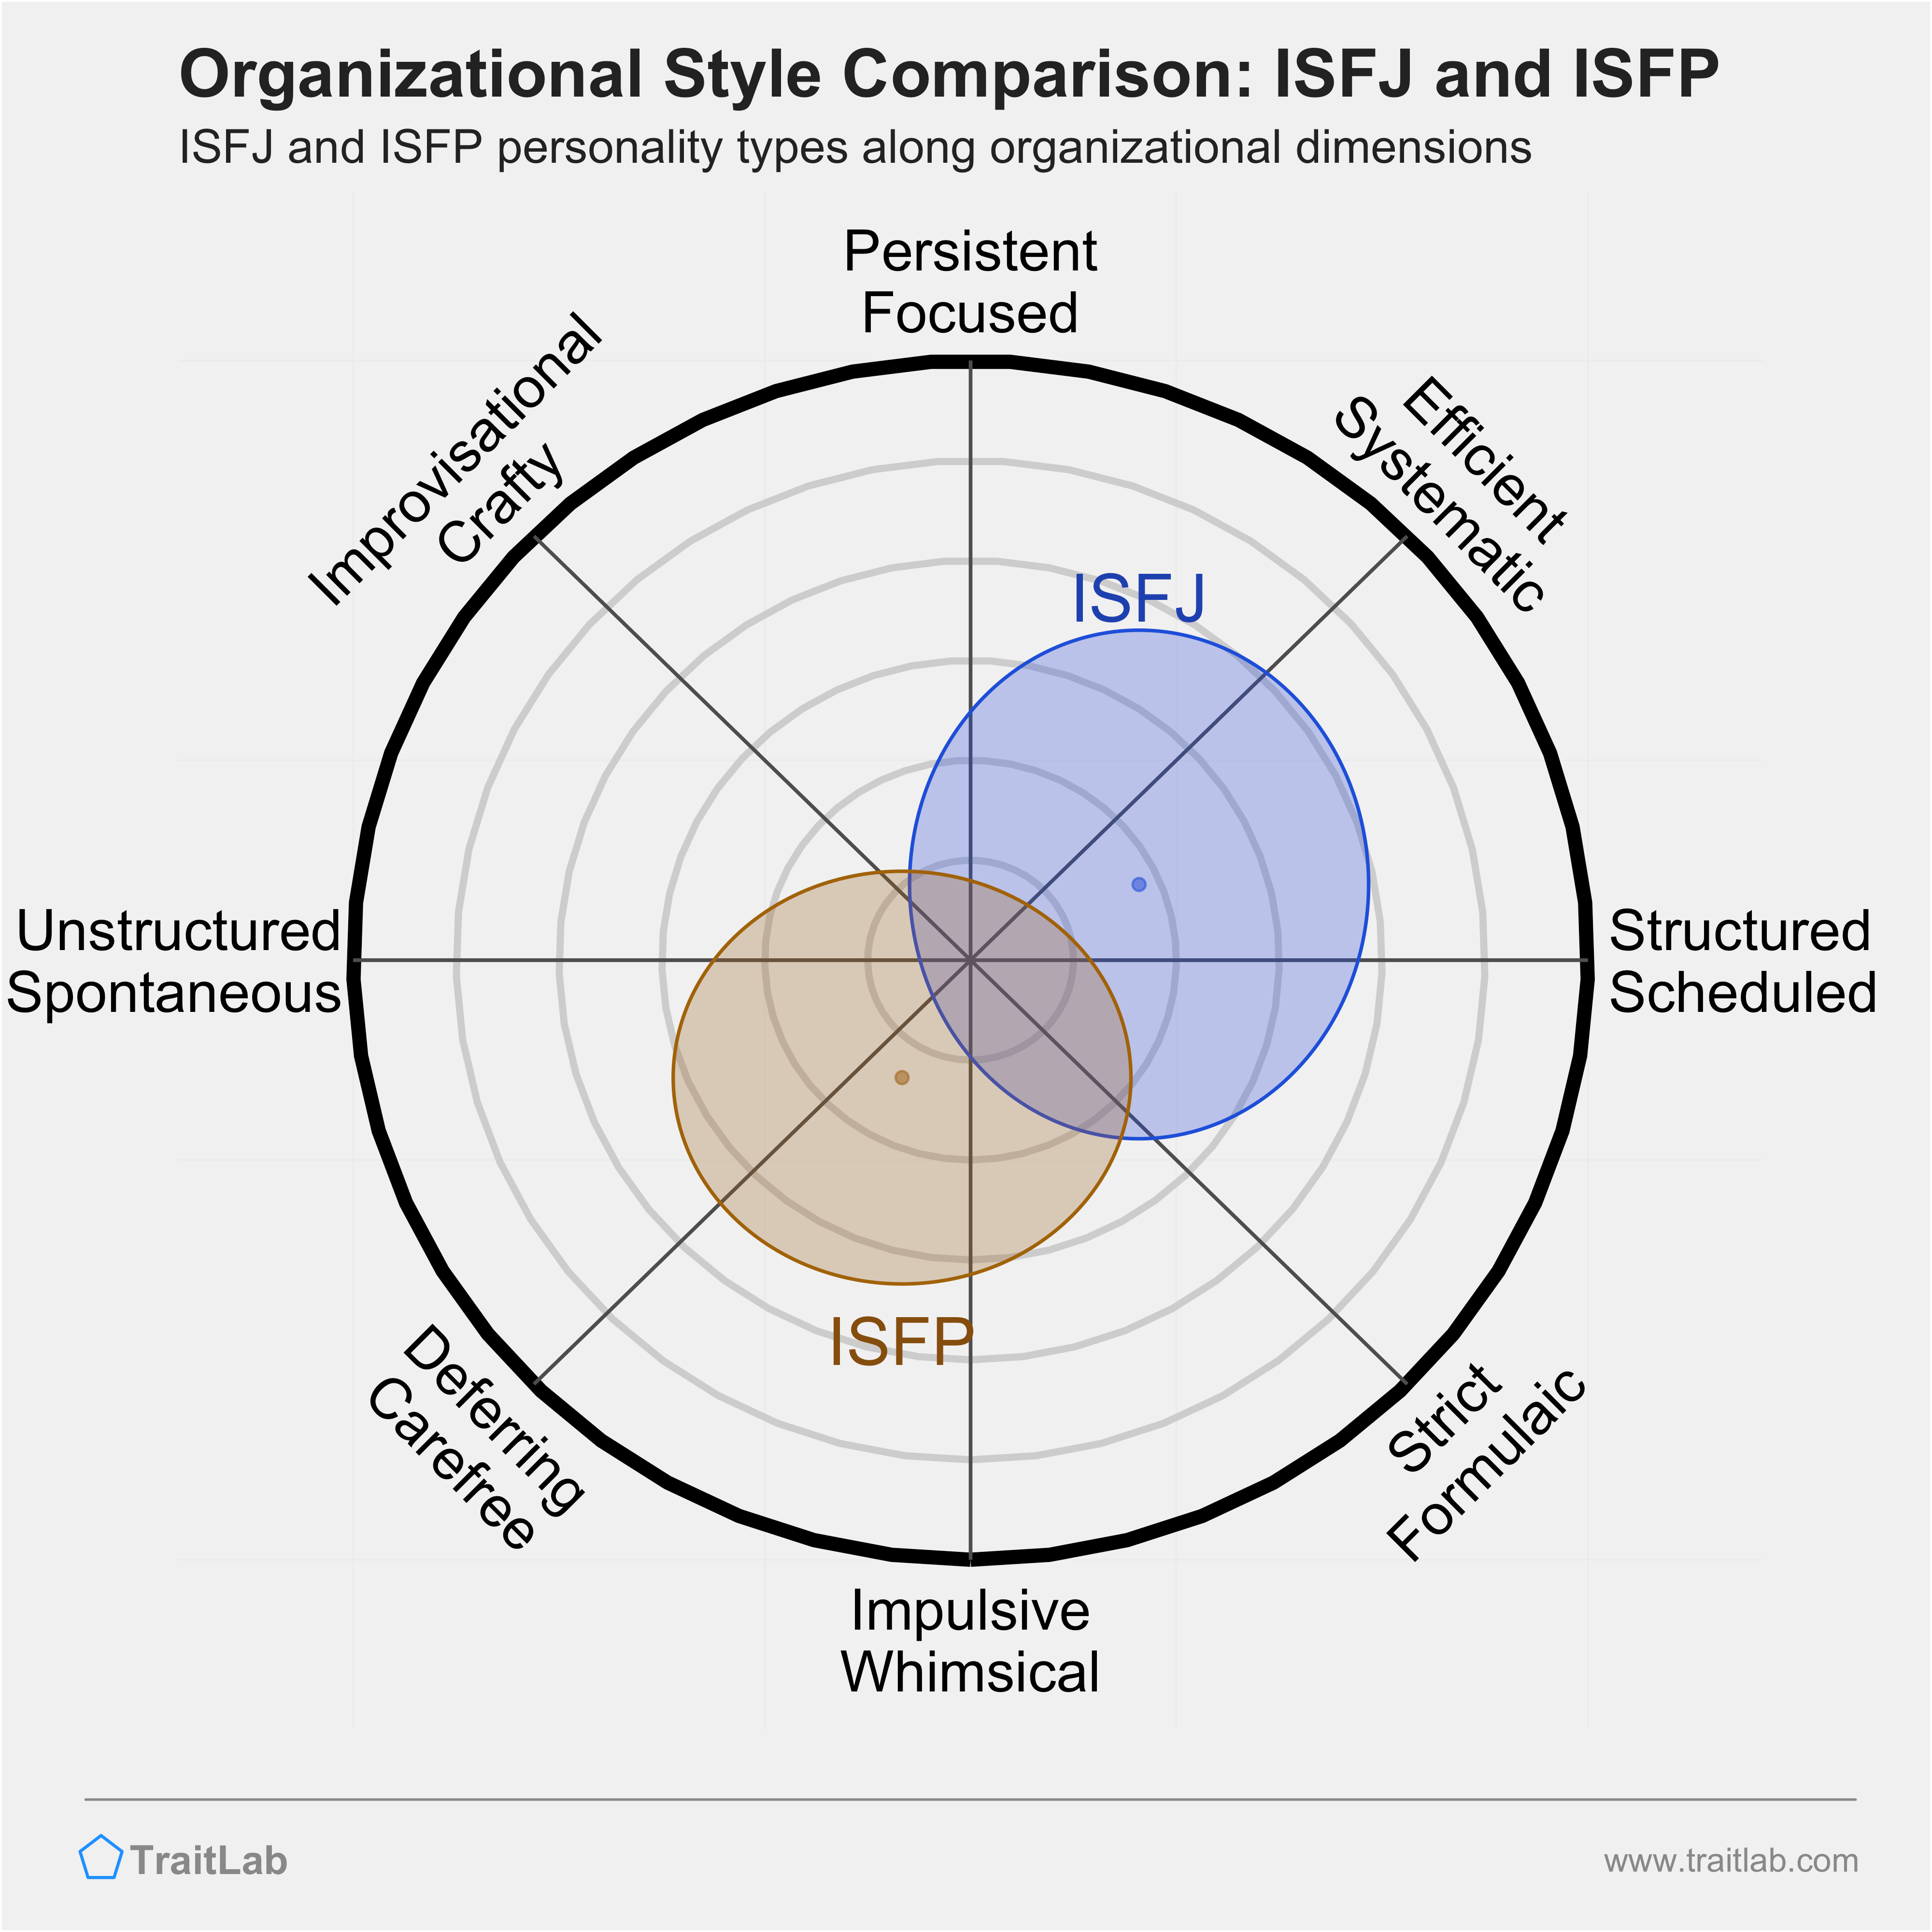 ISFJ and ISFP comparison across organizational dimensions